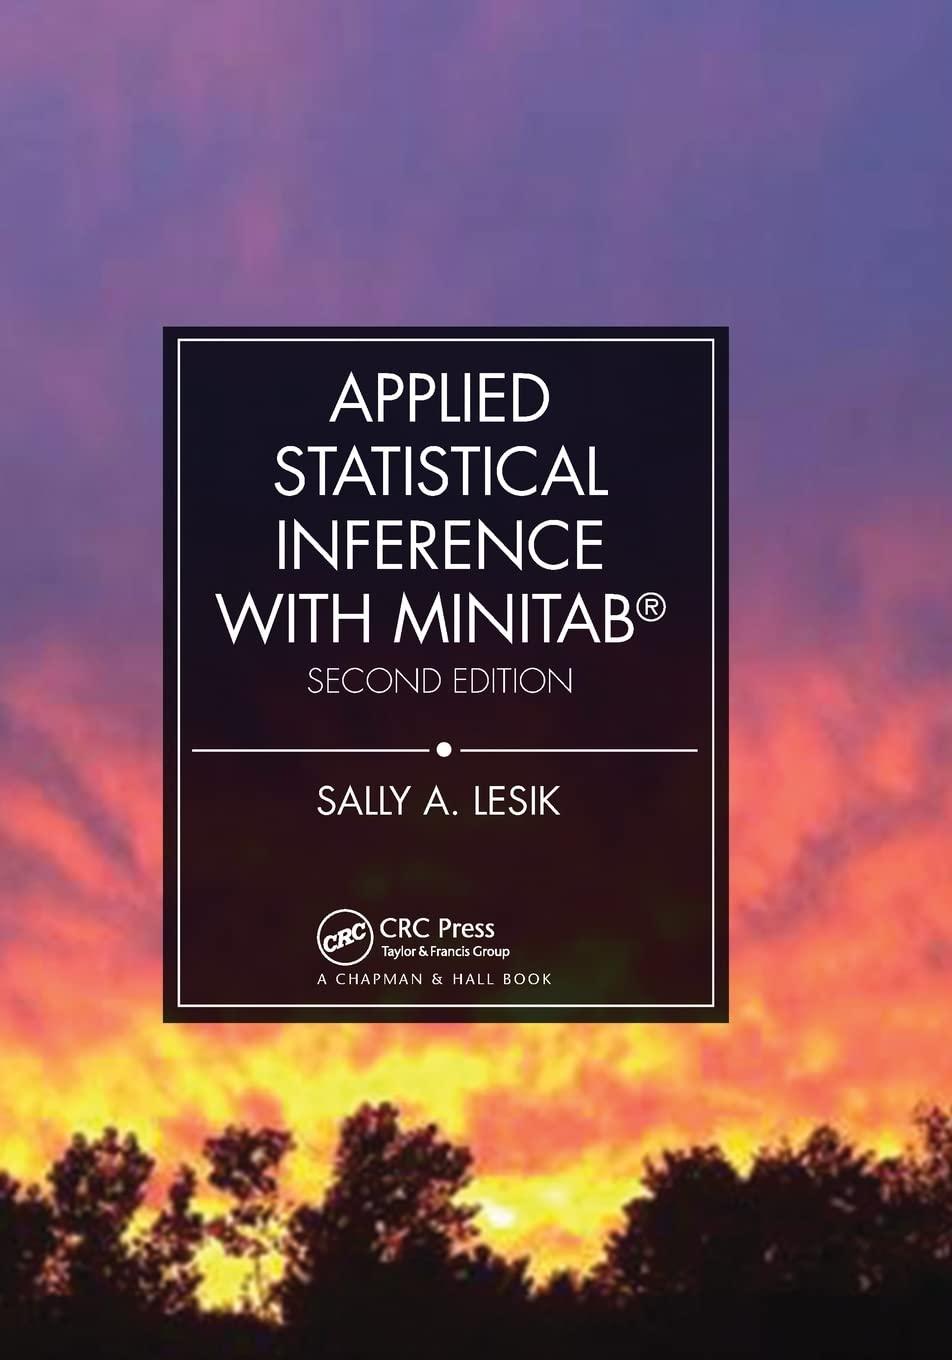 applied statistical inference with minitab 2nd edition sally a. lesik 0367780577, 9780367780579